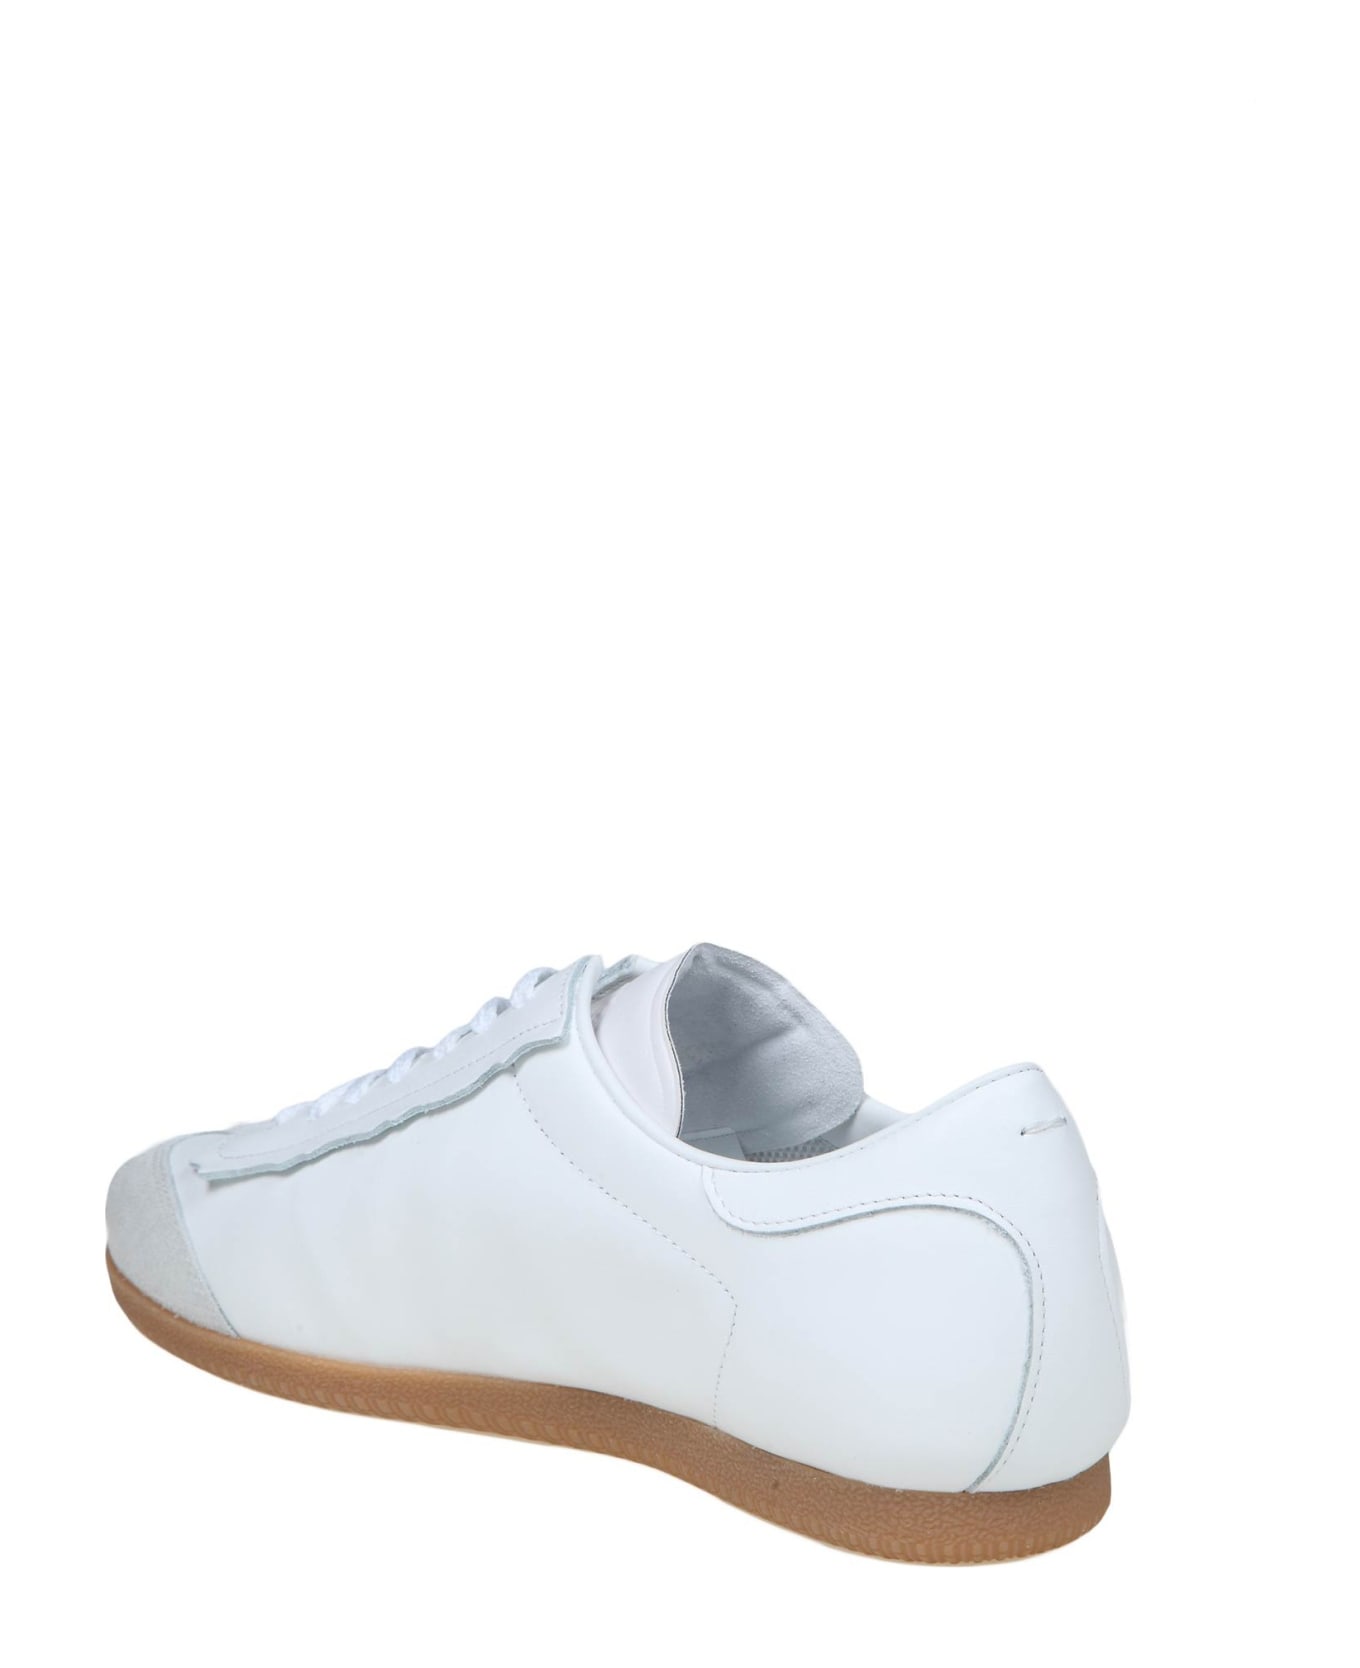 Maison Margiela Sneakers In Leather Color White - WHITE